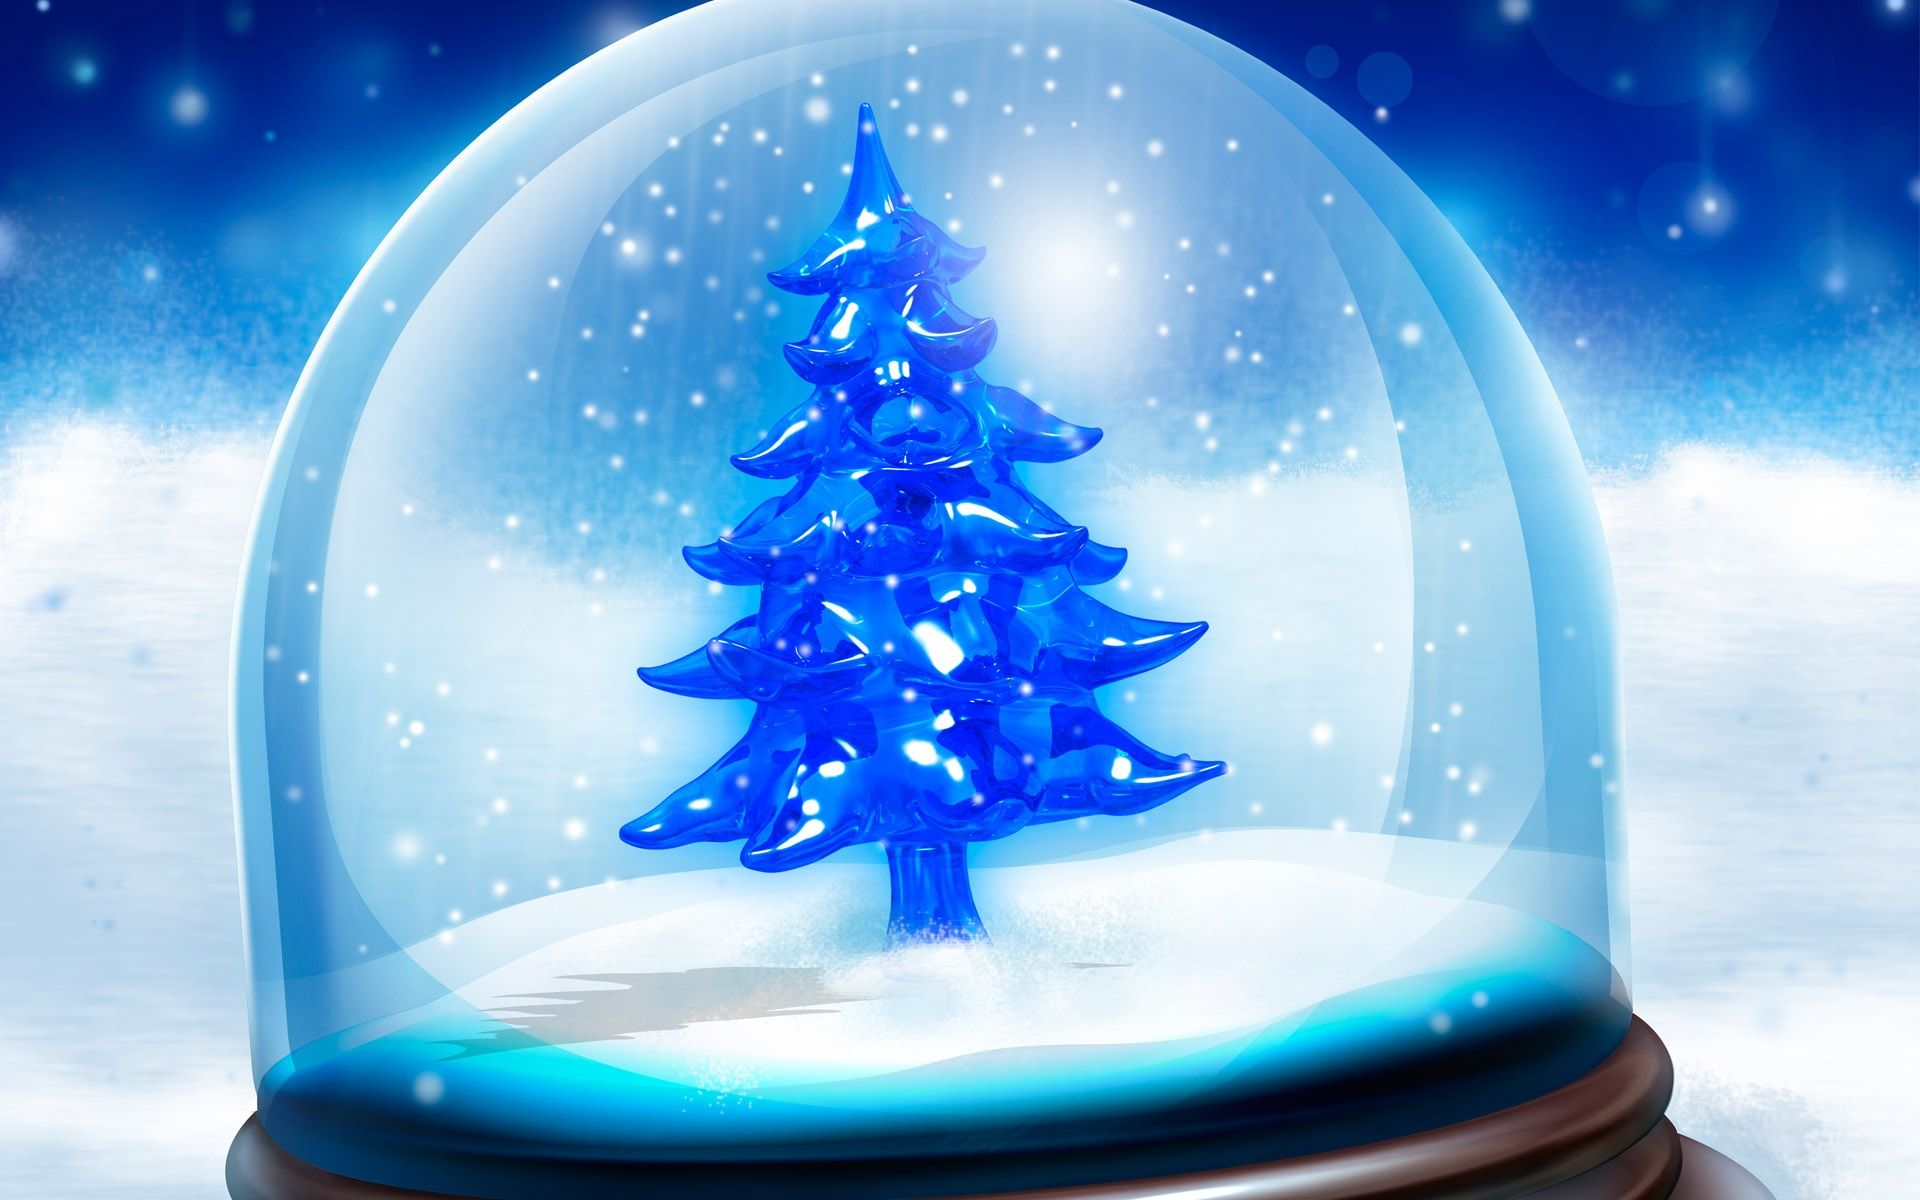 Snowy Christmas Tree Wallpaper in jpg format for free download